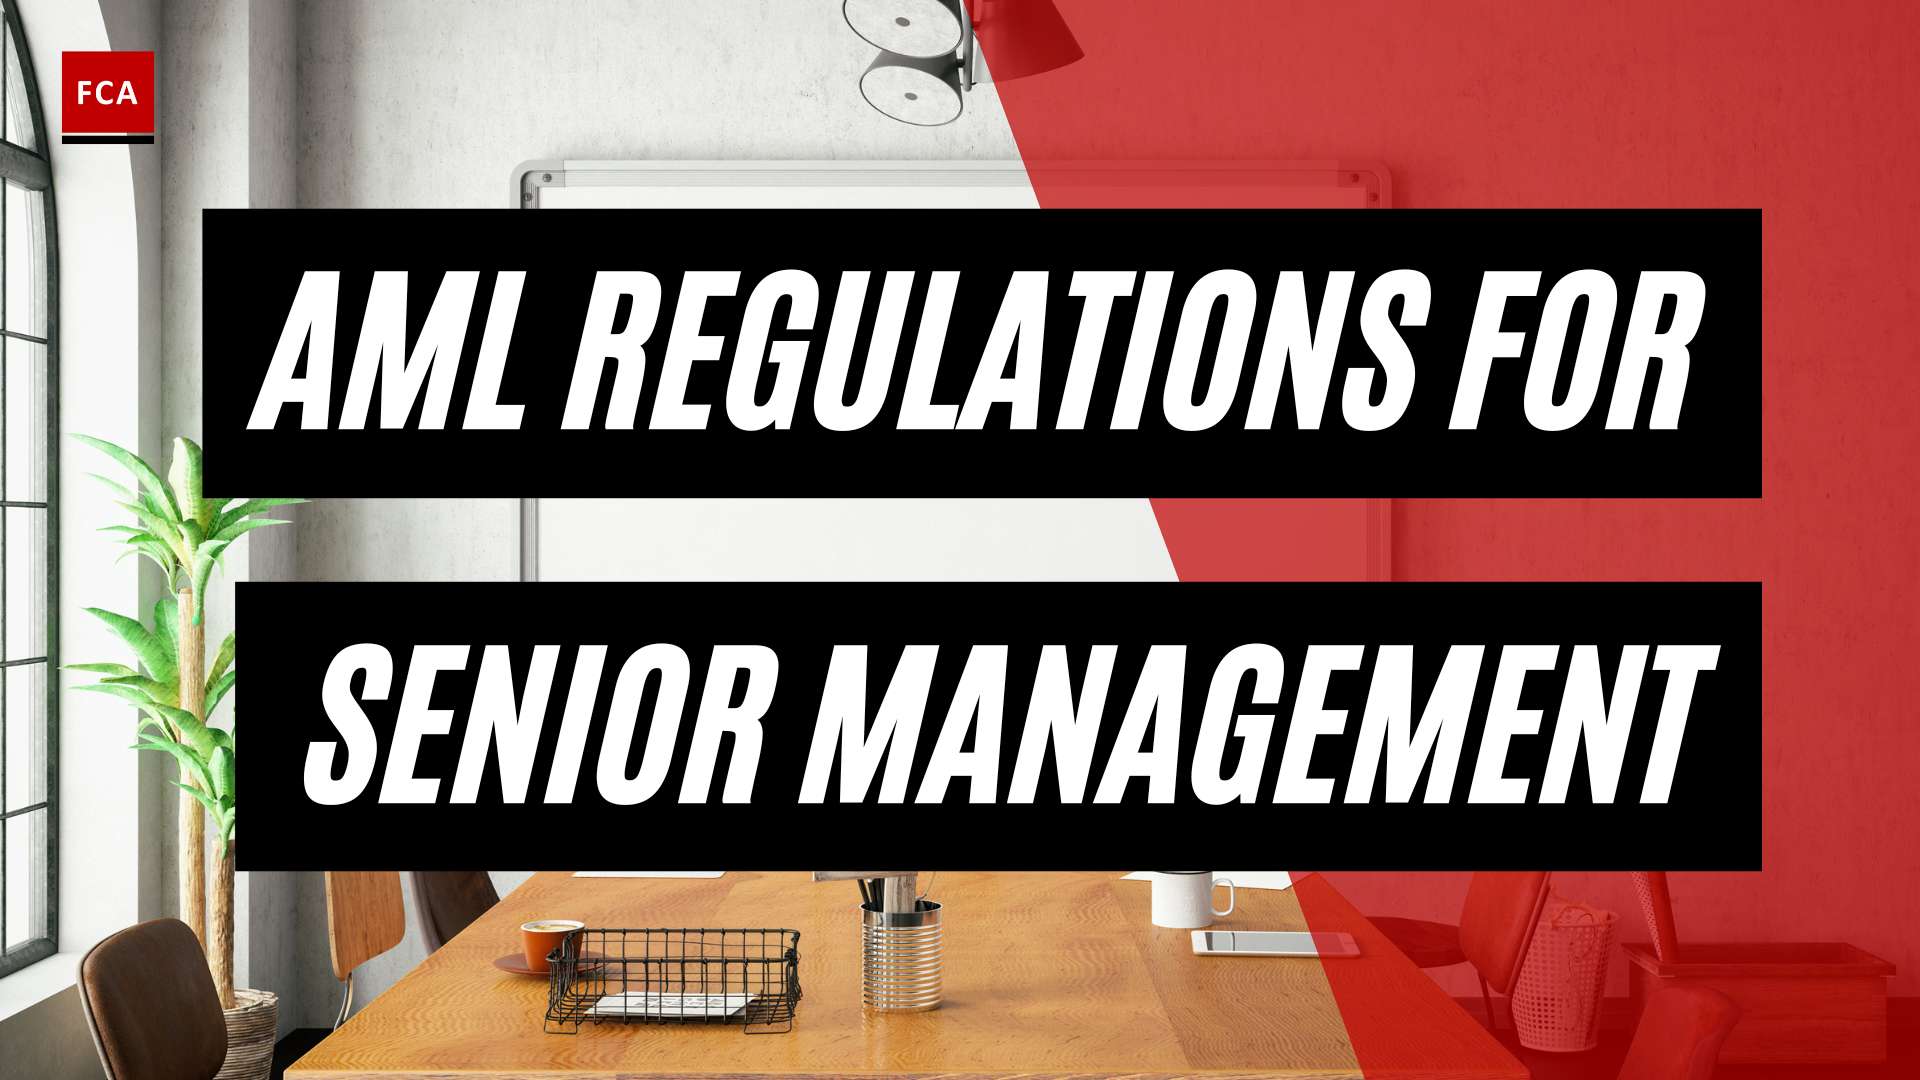 Stay Ahead Of Financial Crime: Aml Regulations For Senior Management